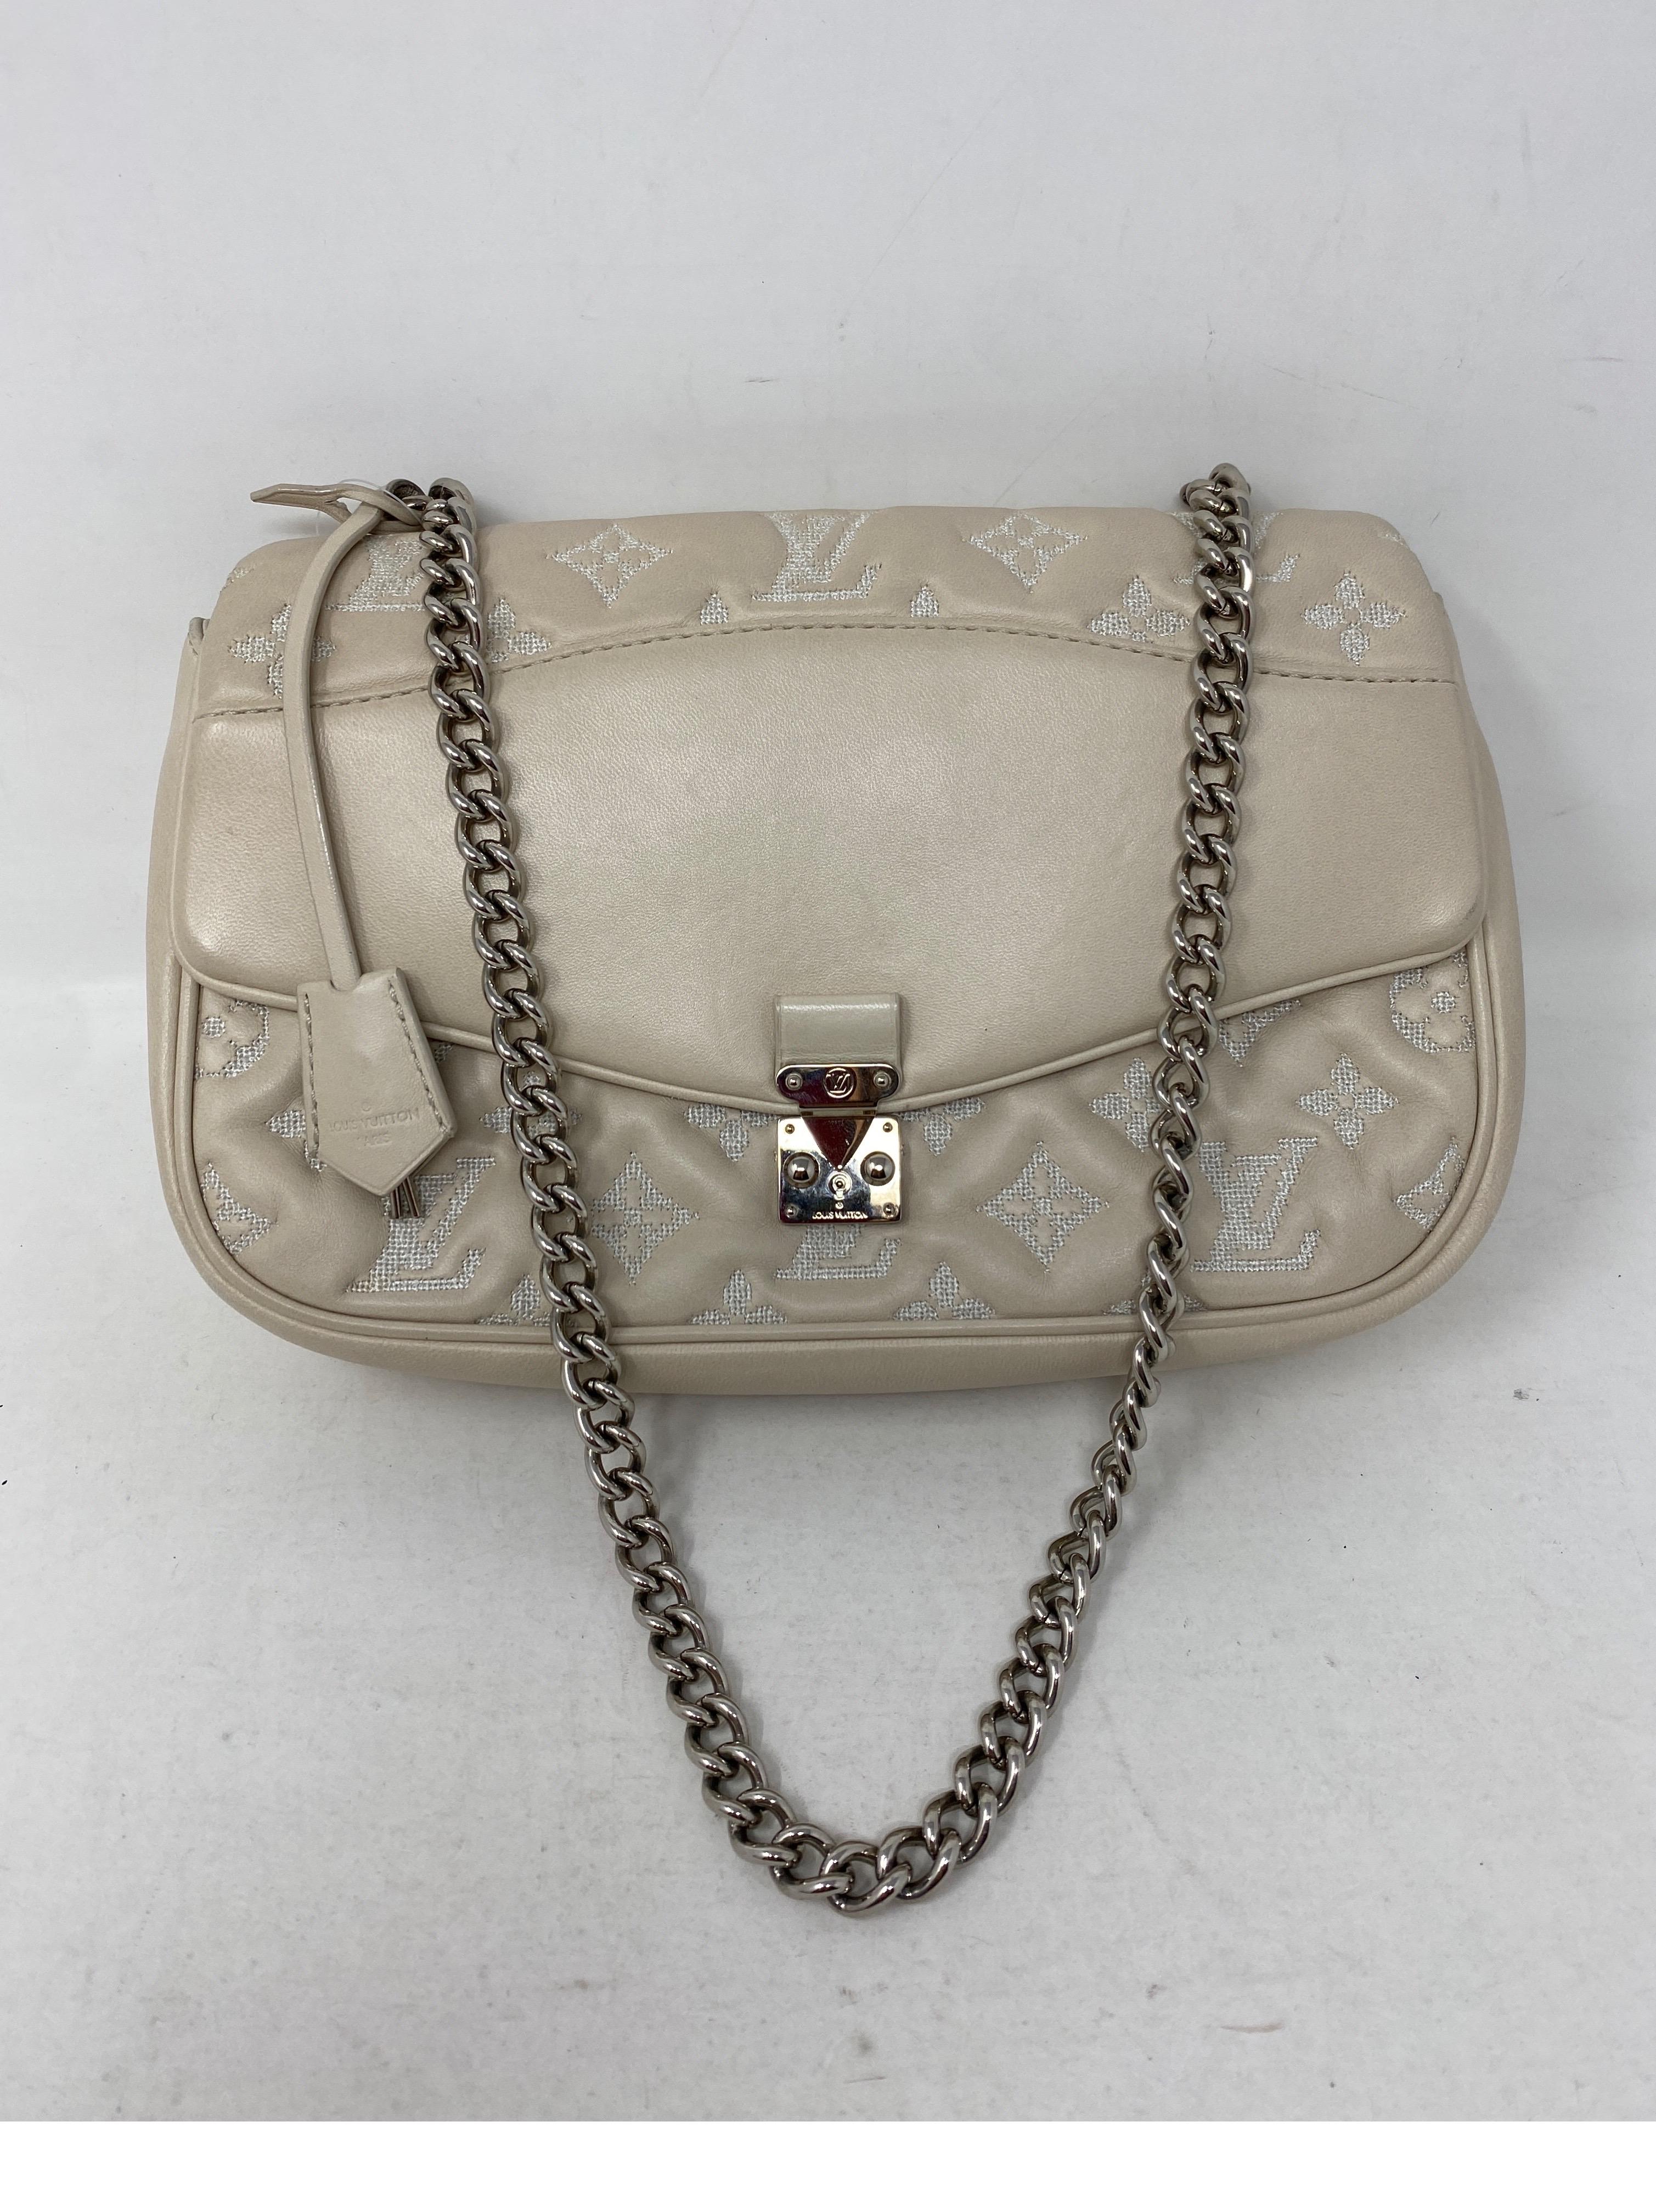 Louis Vuitton White Eimpreinte Leather Bag. Silver hardware. Good condition. Can be worn as a clutch or a shoulder bag. Guaranteed authentic. 